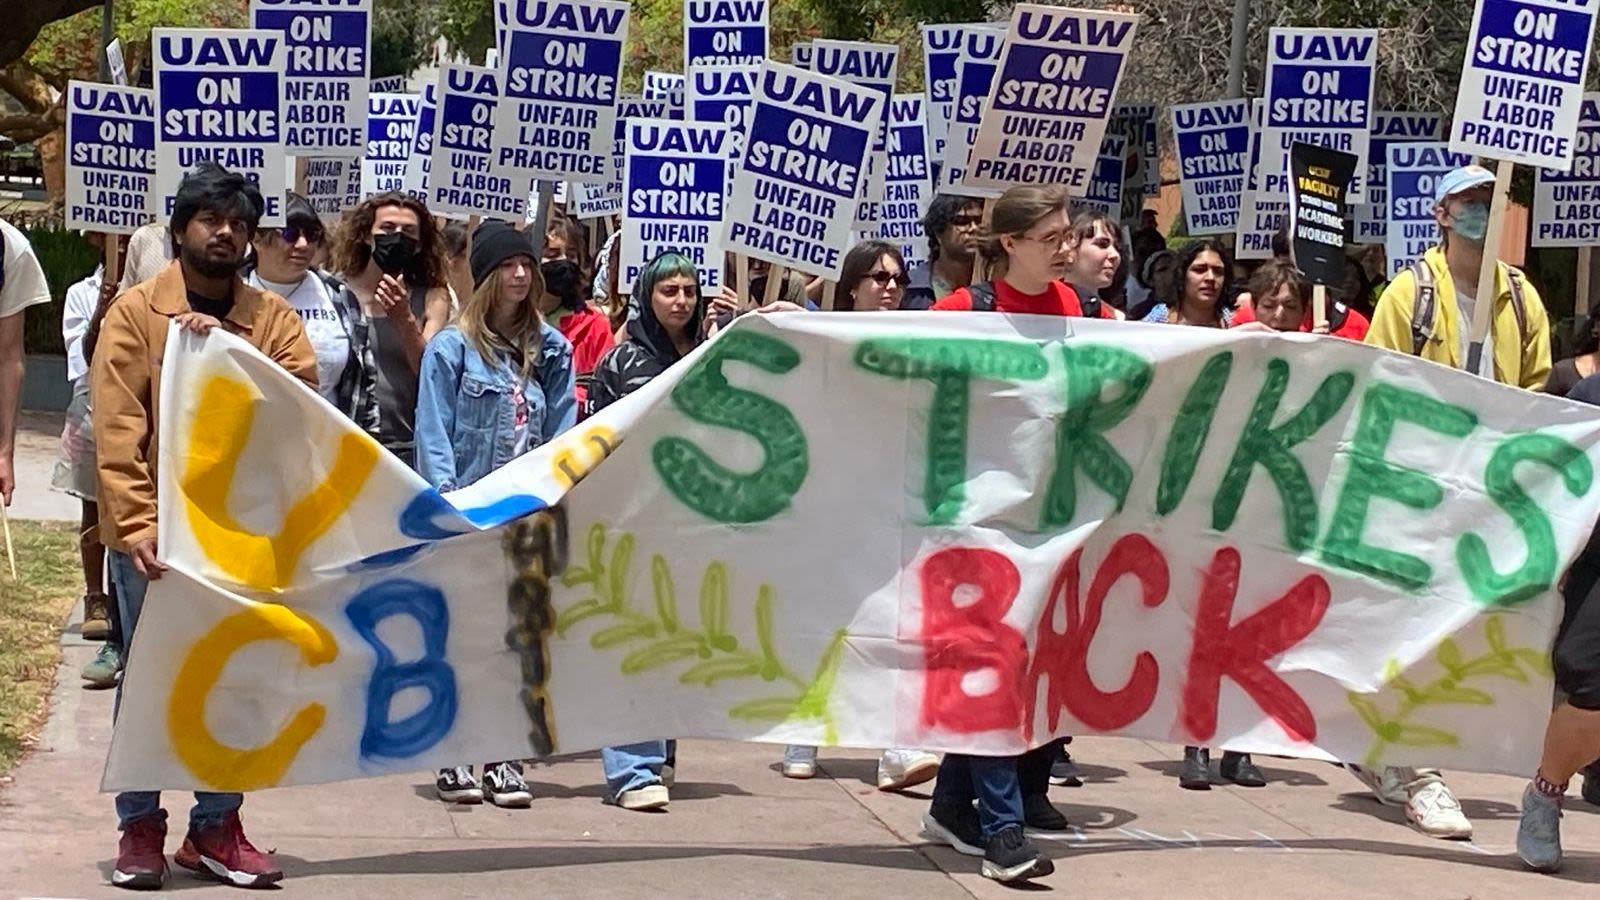 Gaza strike expands to two more University of California campuses, as UAW bureaucracy promotes dead-end divestment strategy